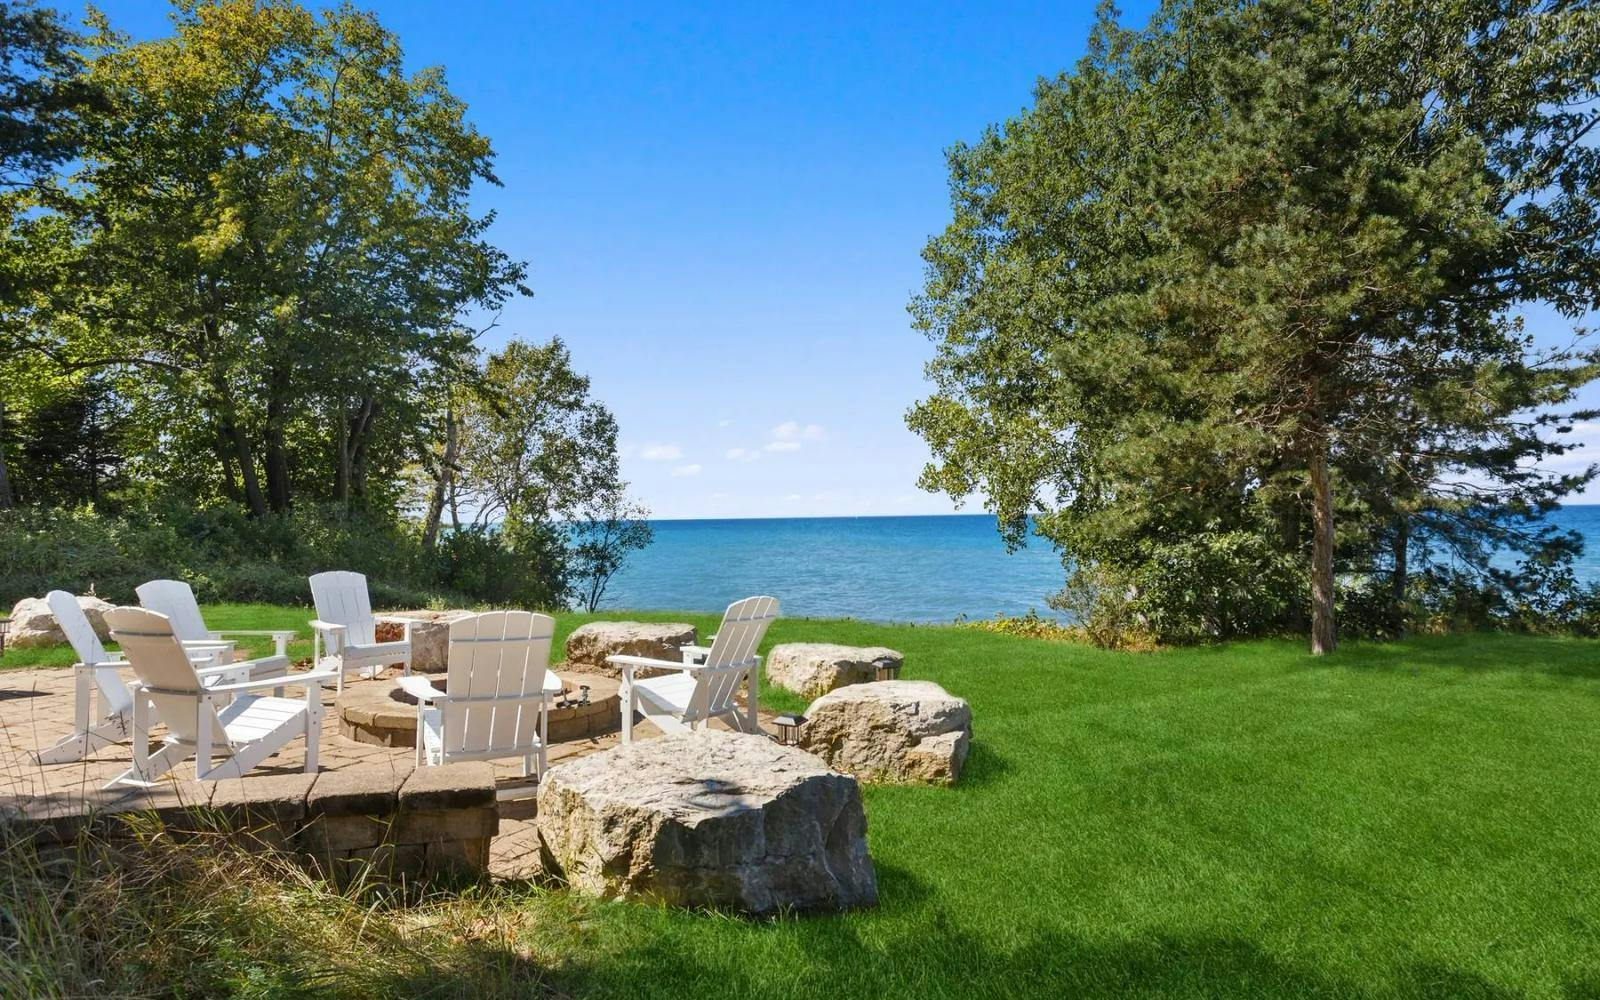 Embrace the Charm of Southwest Michigan's Lakeshore Towns